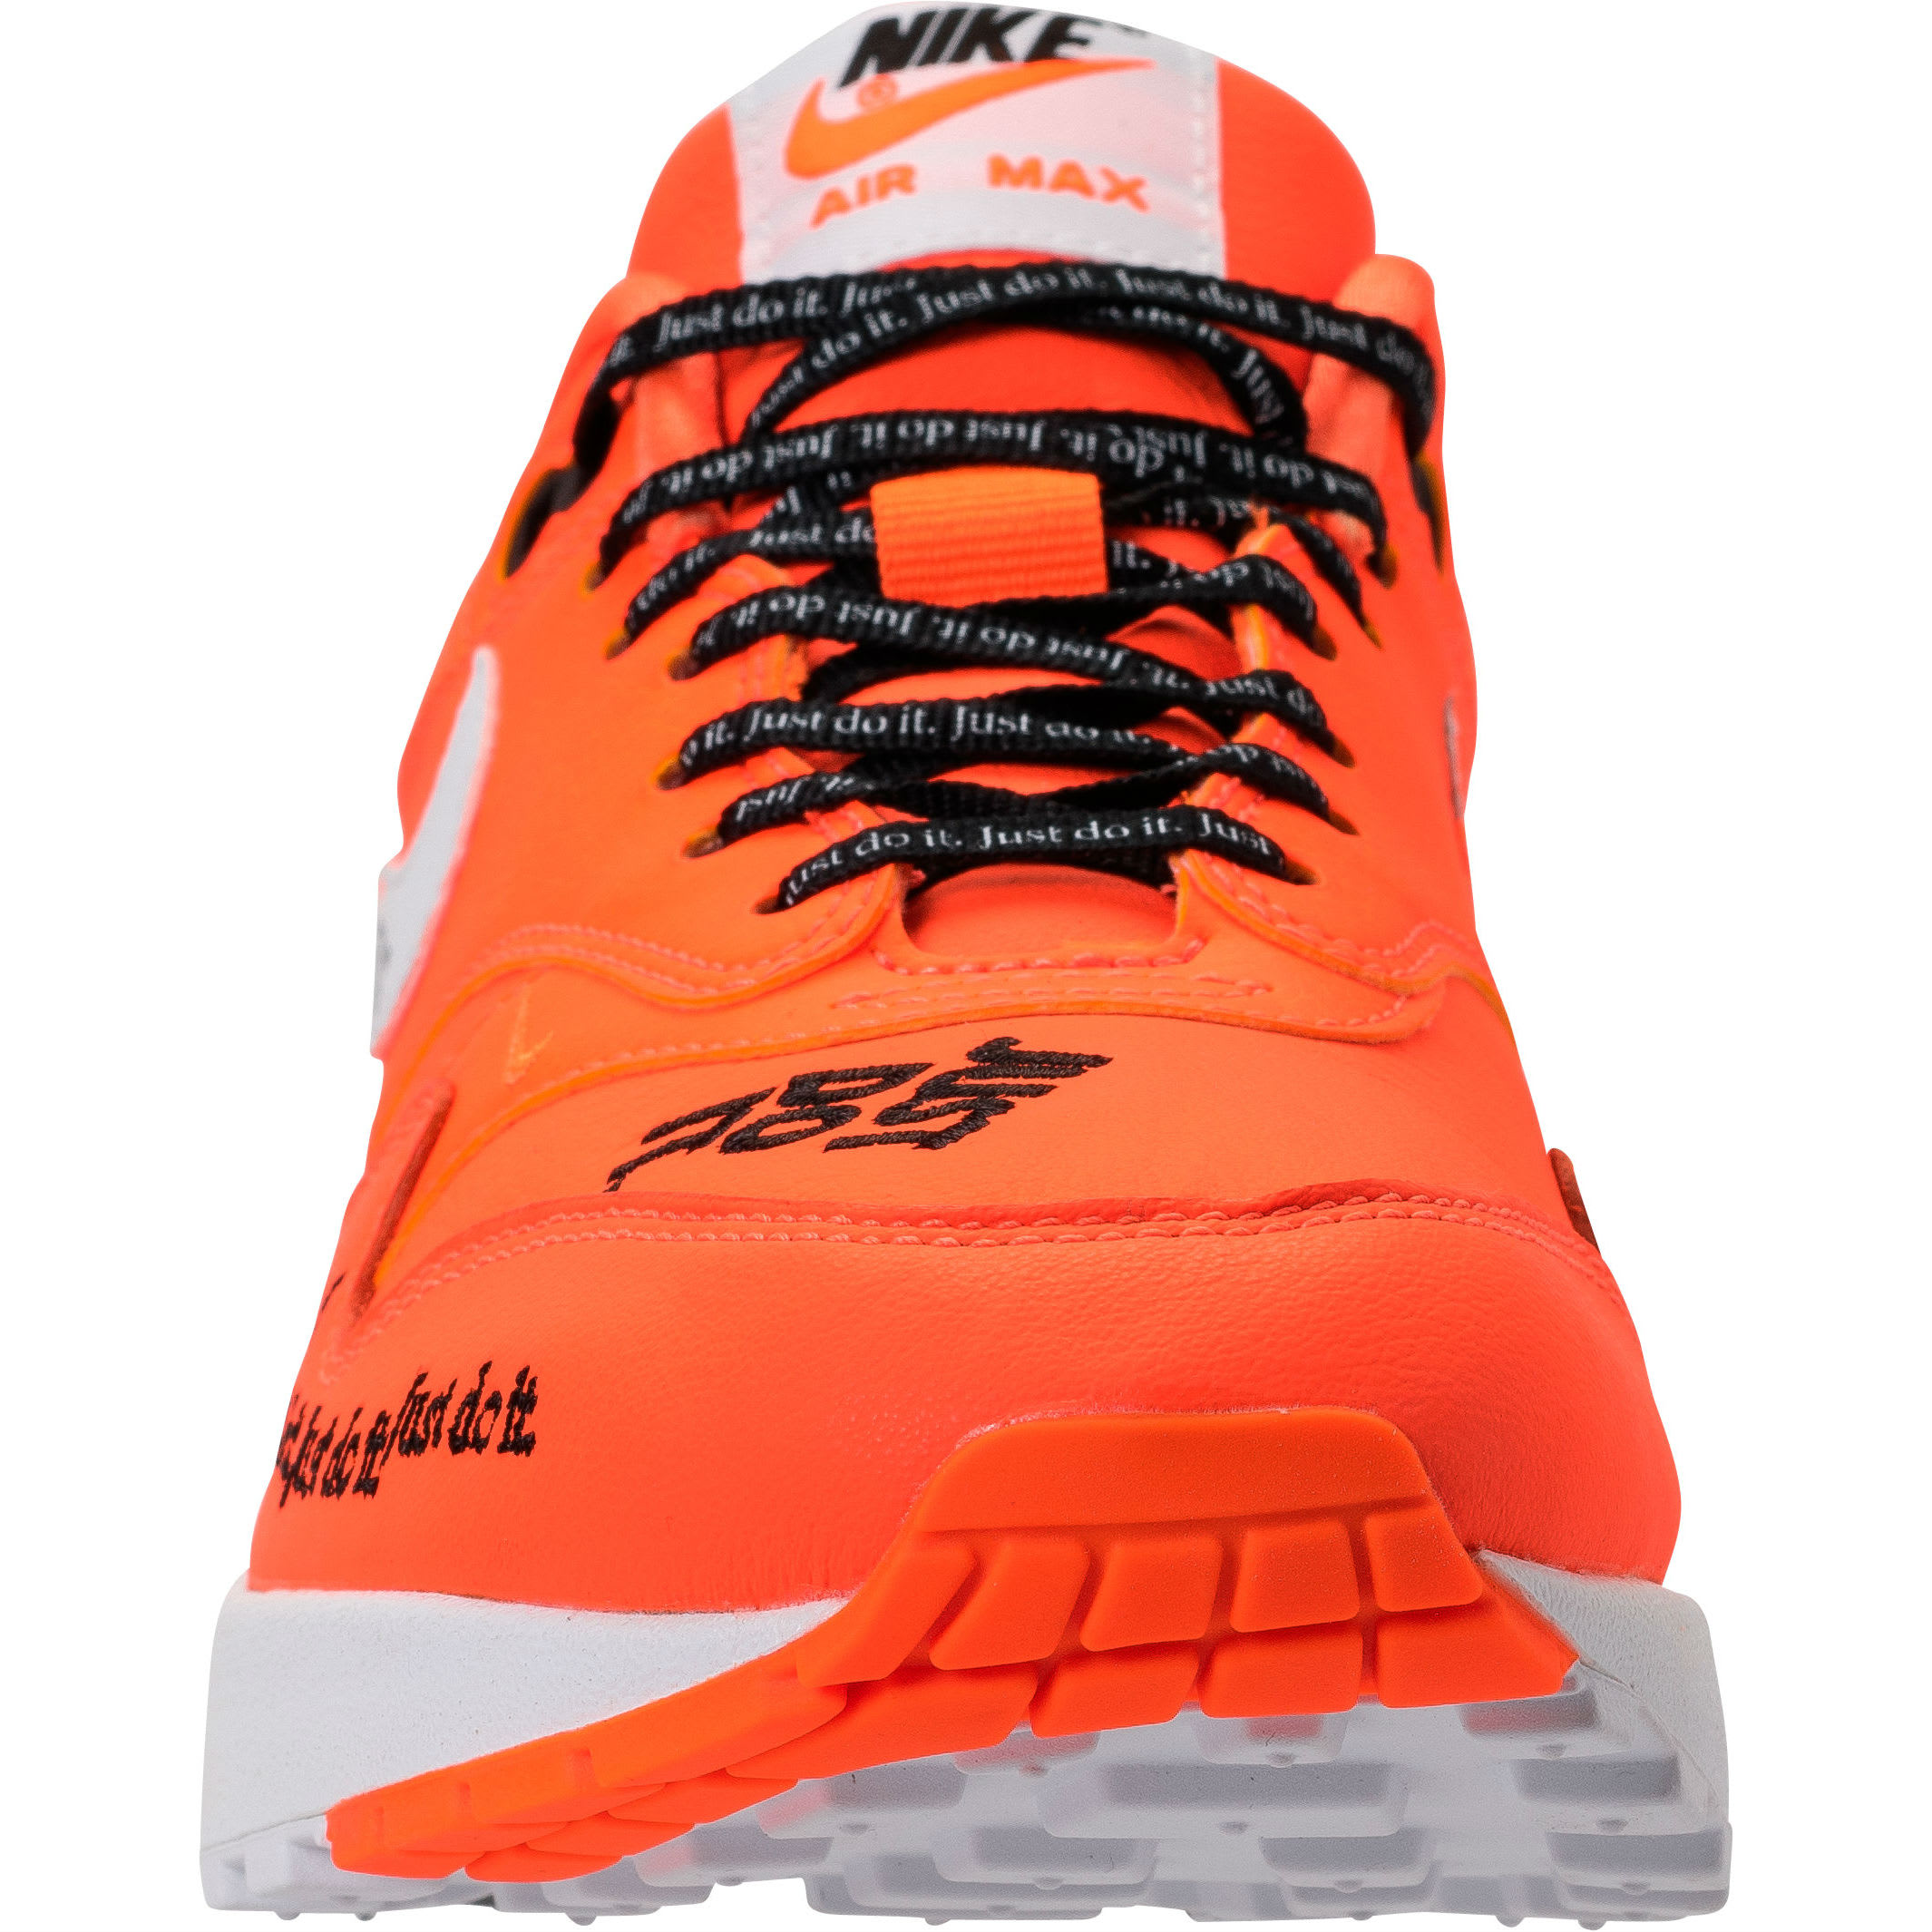 Nike Air Max 1 Just Do It Orange Release Date 917691-800 Front